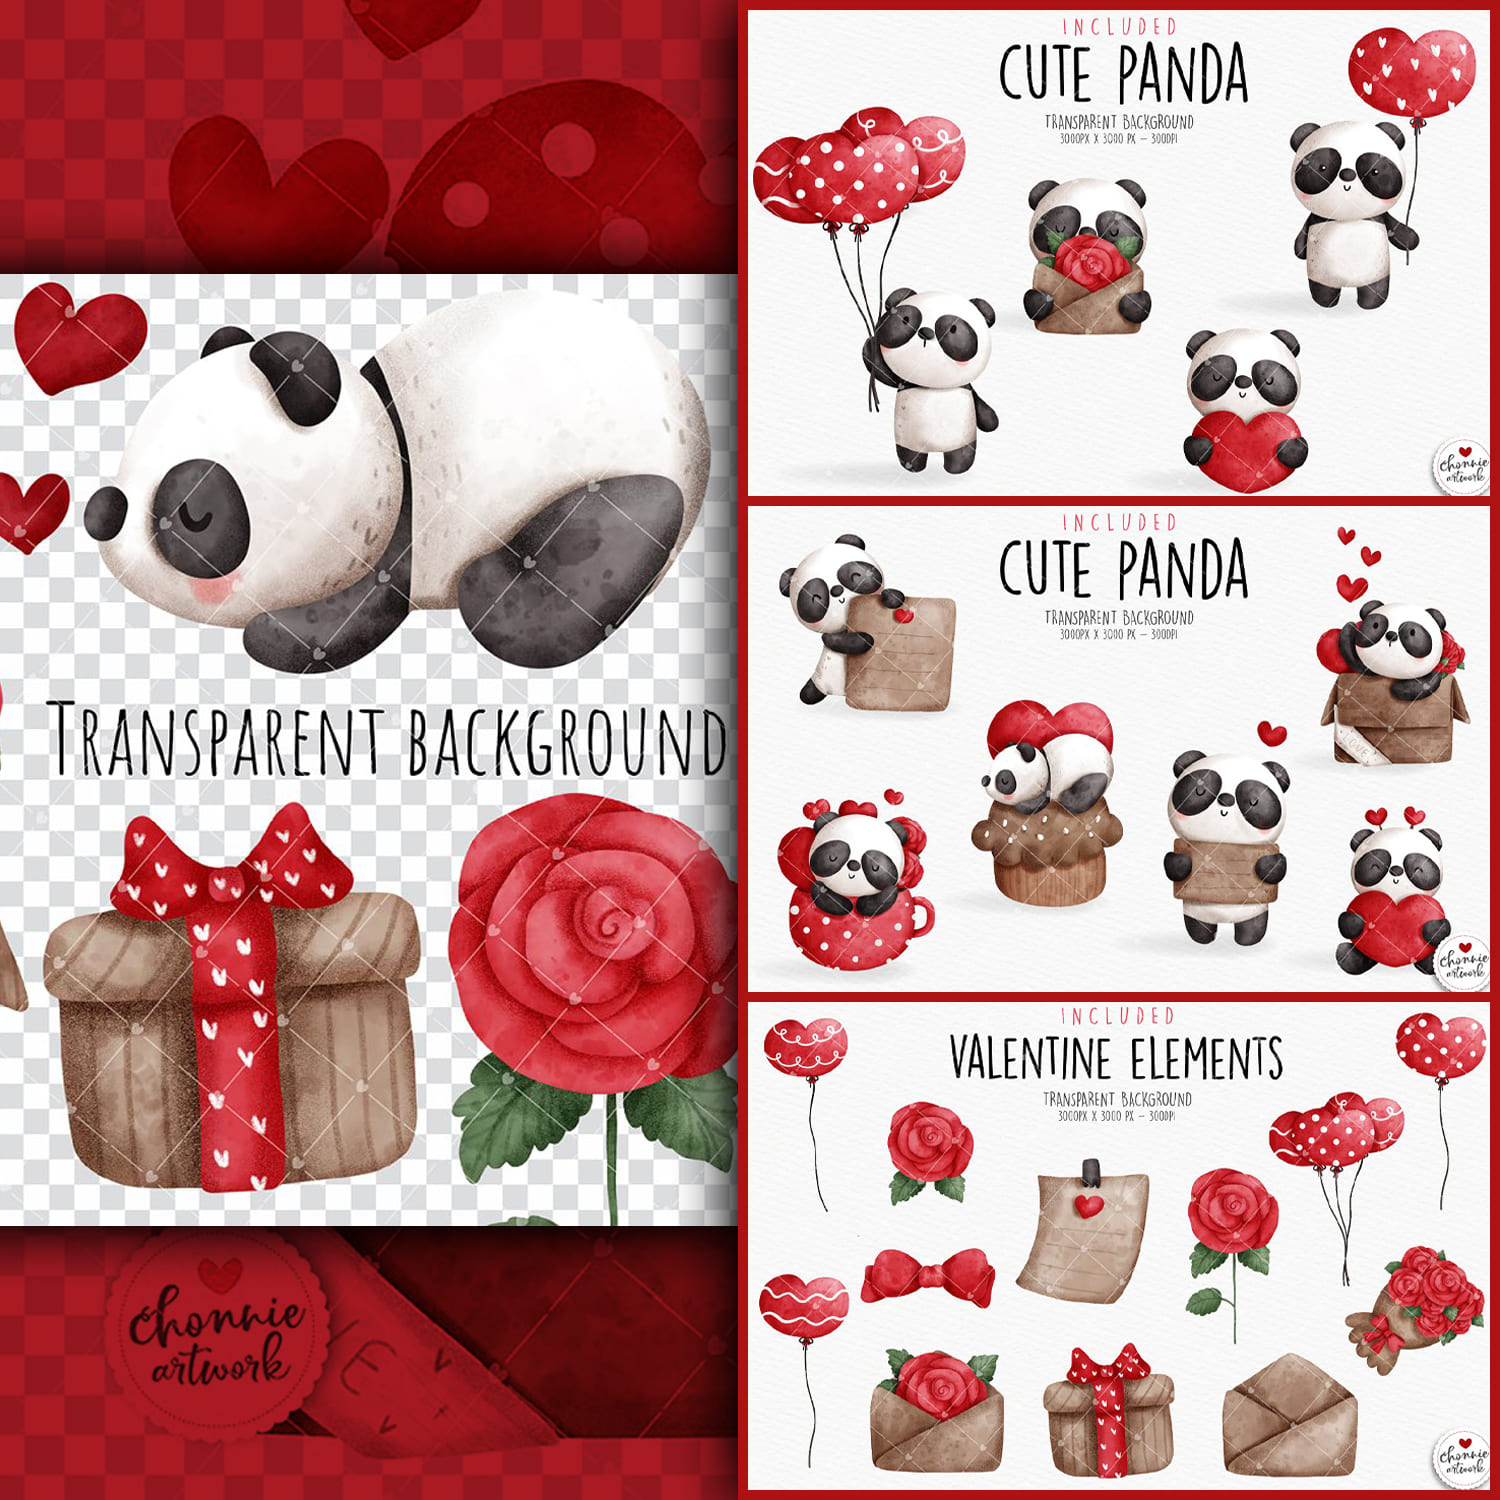 Valentine's panda clipart created by Chonnieartwork.